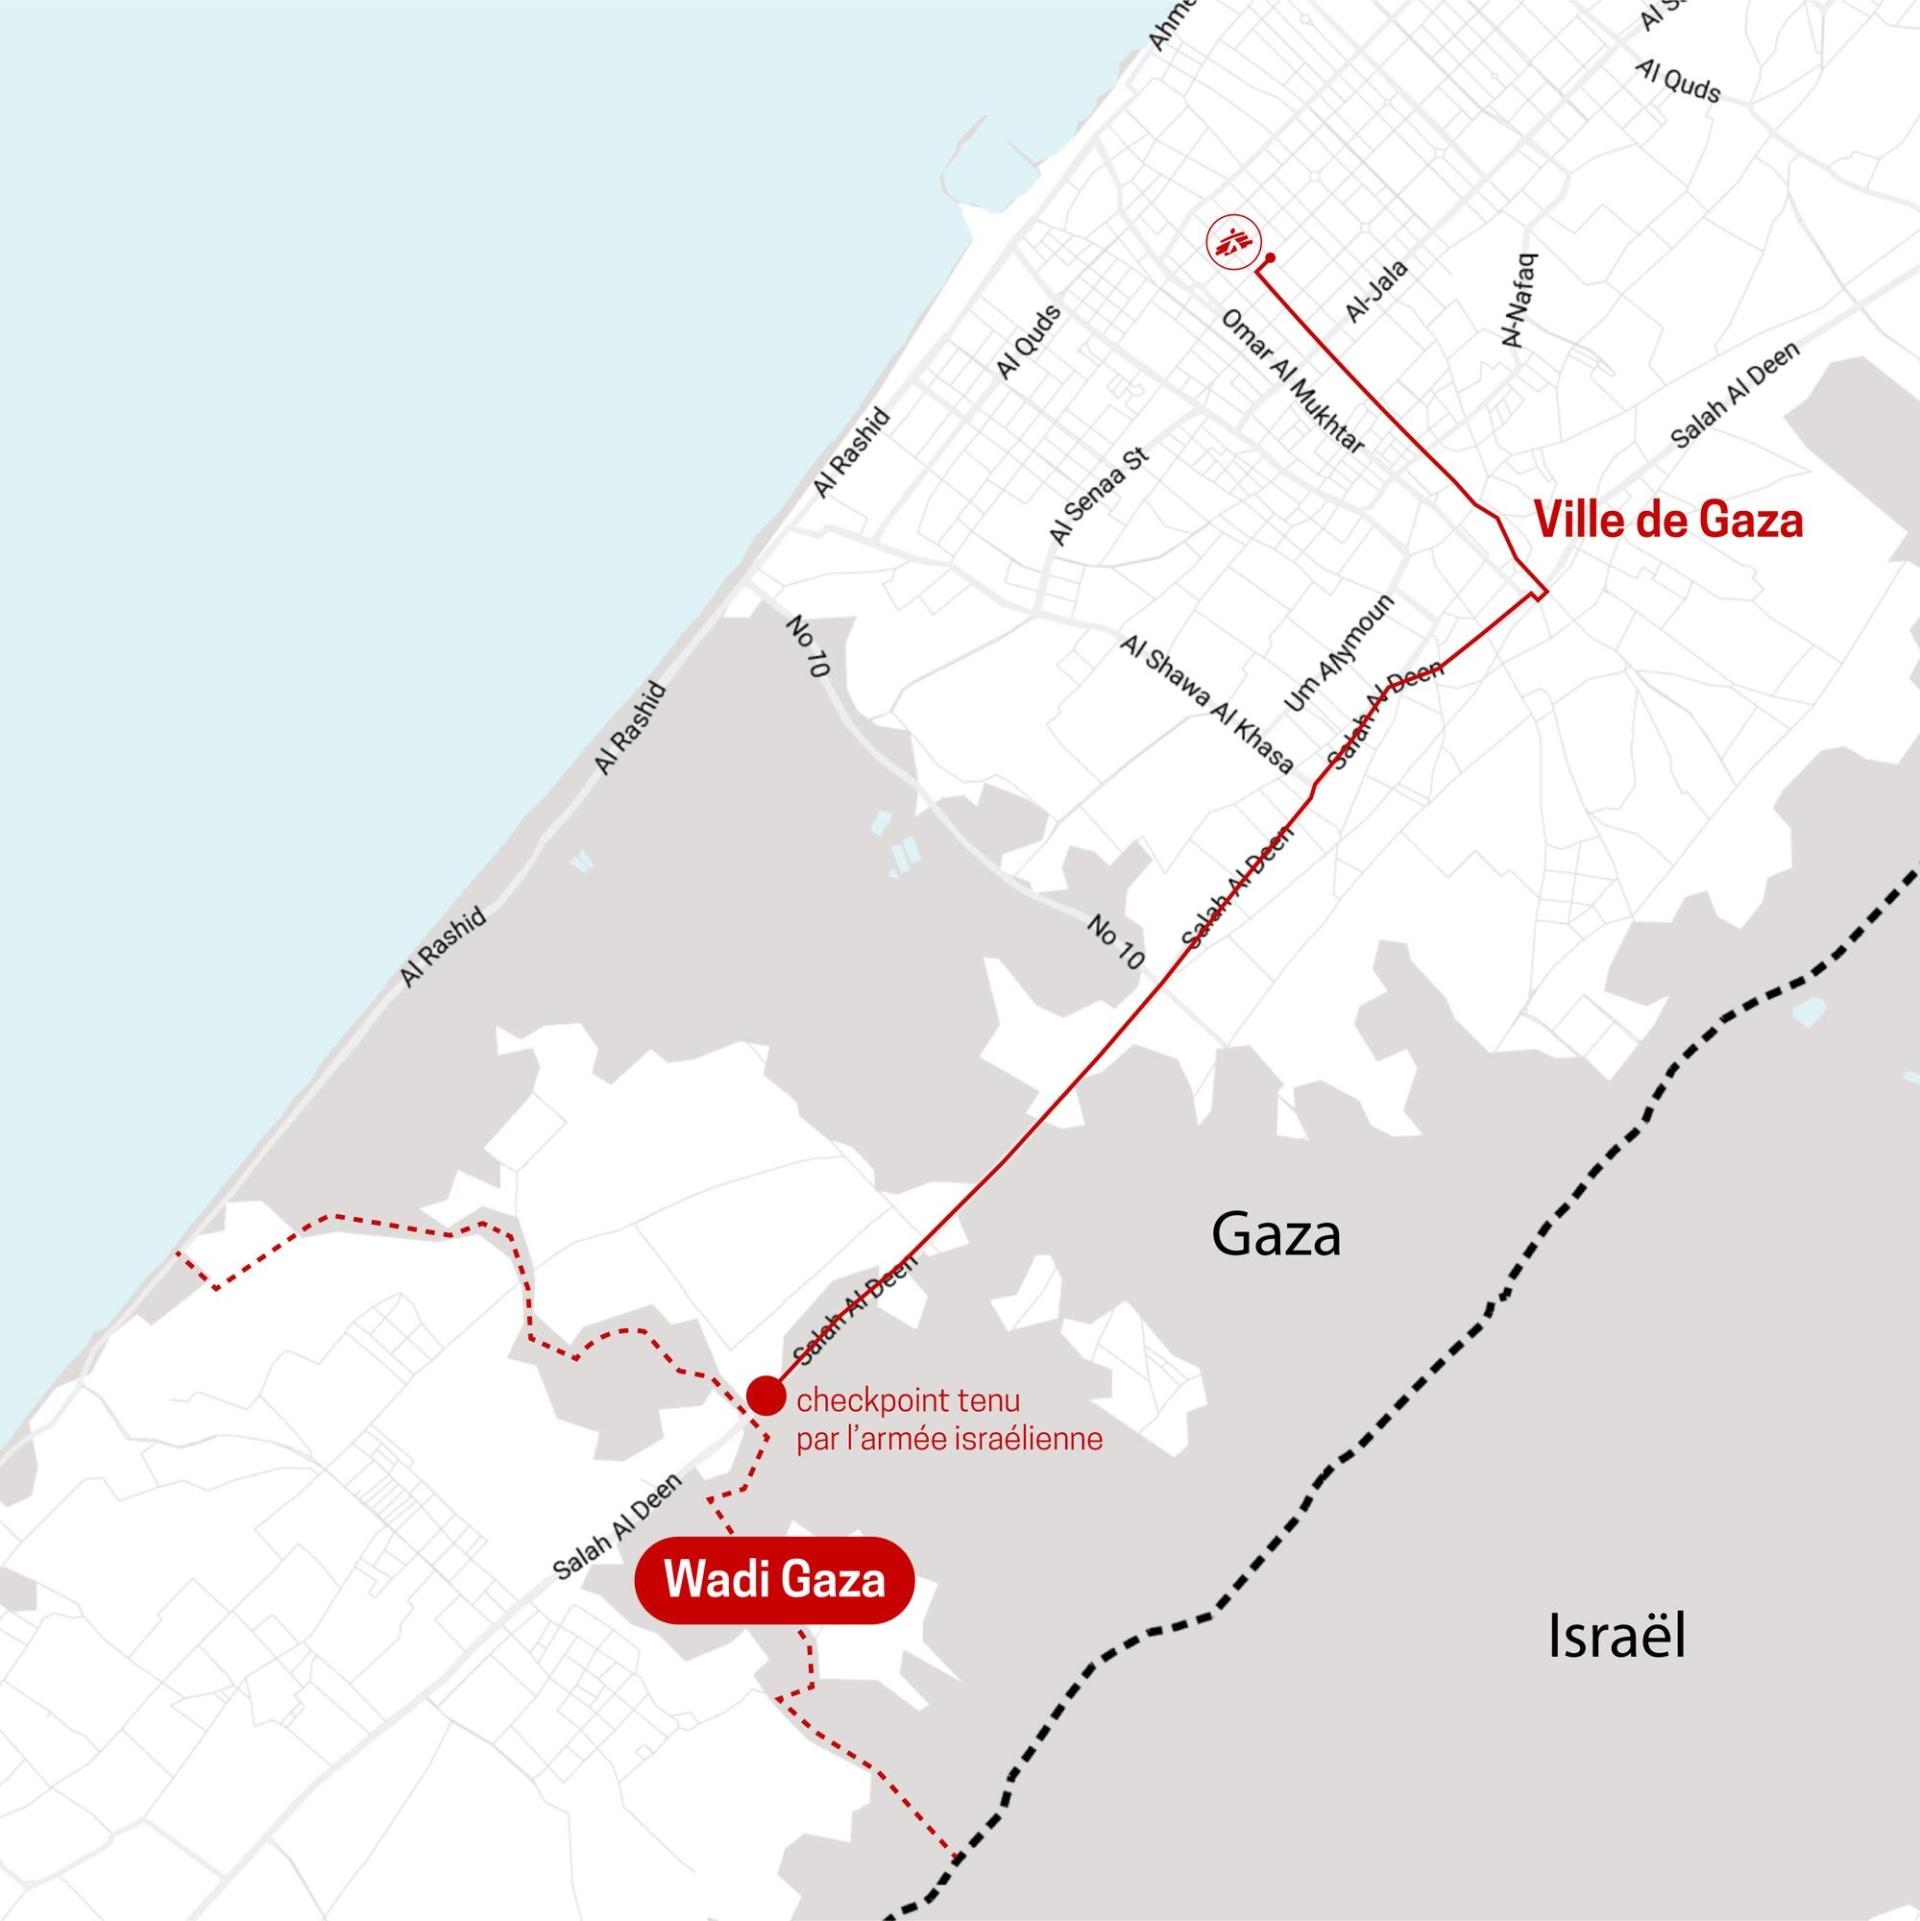 MSF convoy attacked in Gaza (MAP2 FR)